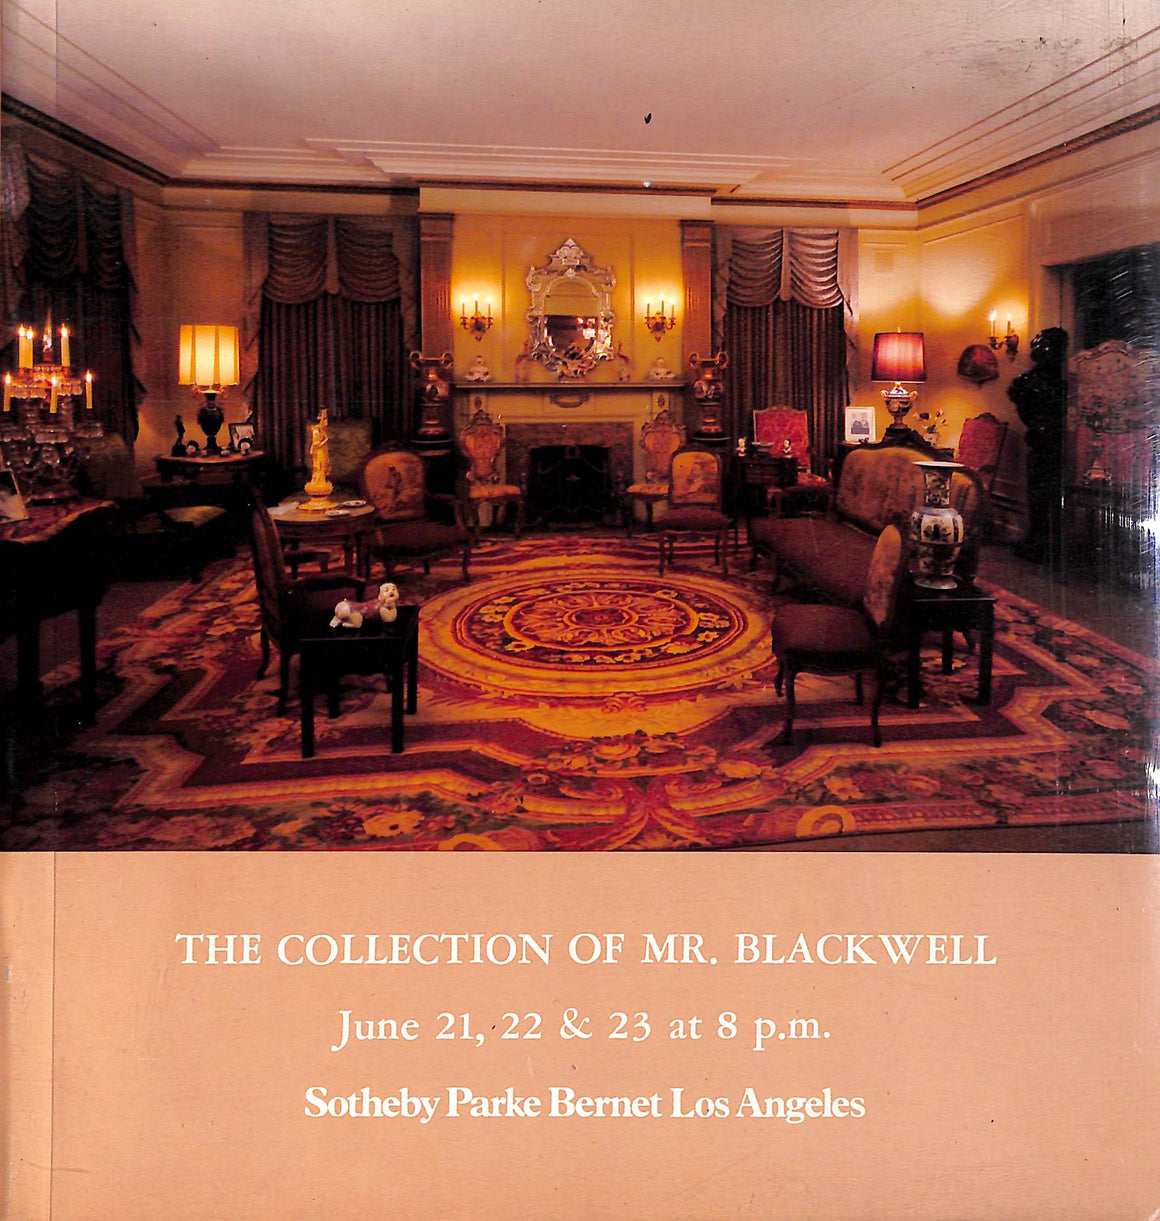 The Collection Of Mr. Blackwell 1977 Sotheby Parke Bernet Los Angeles